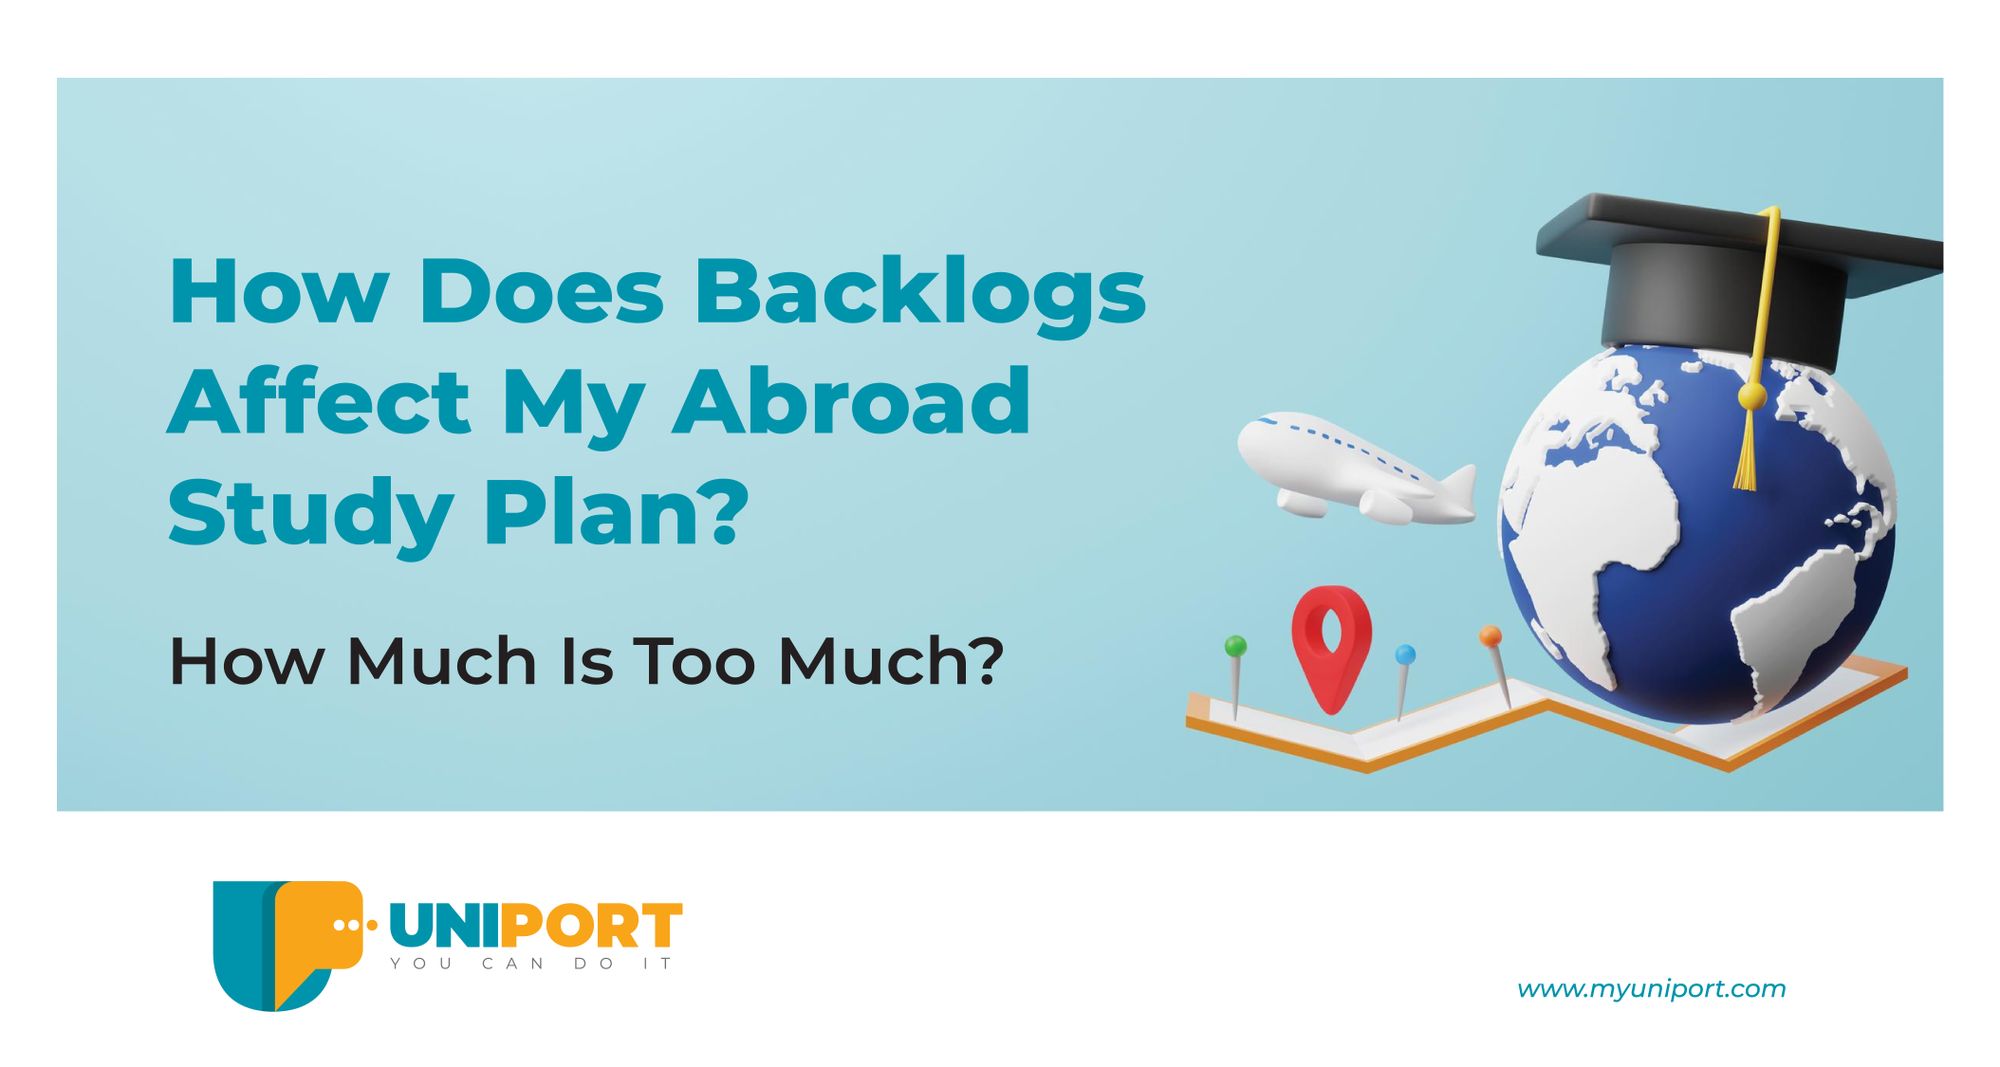 How Does Backlogs Affect My Abroad Study Plan? How Much Is Too Much?